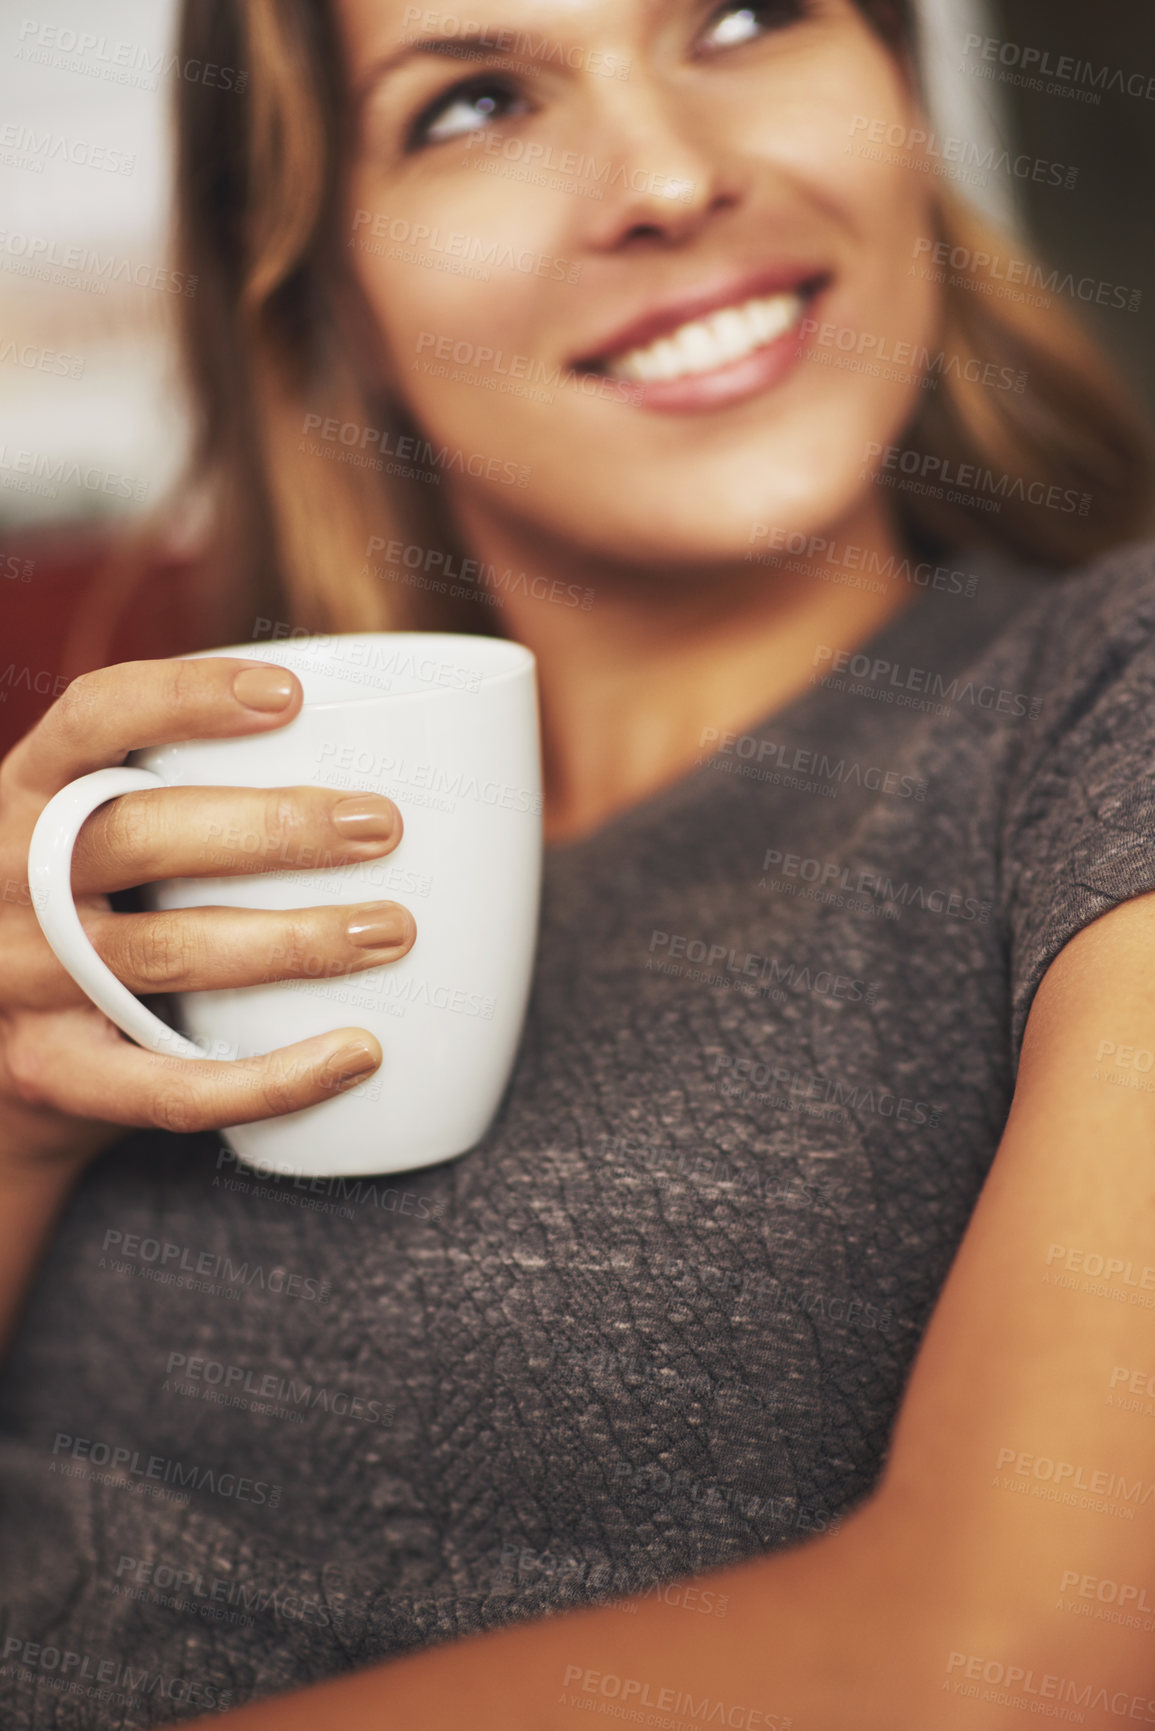 Buy stock photo Shot of a young woman enjoying a warm beverage at home